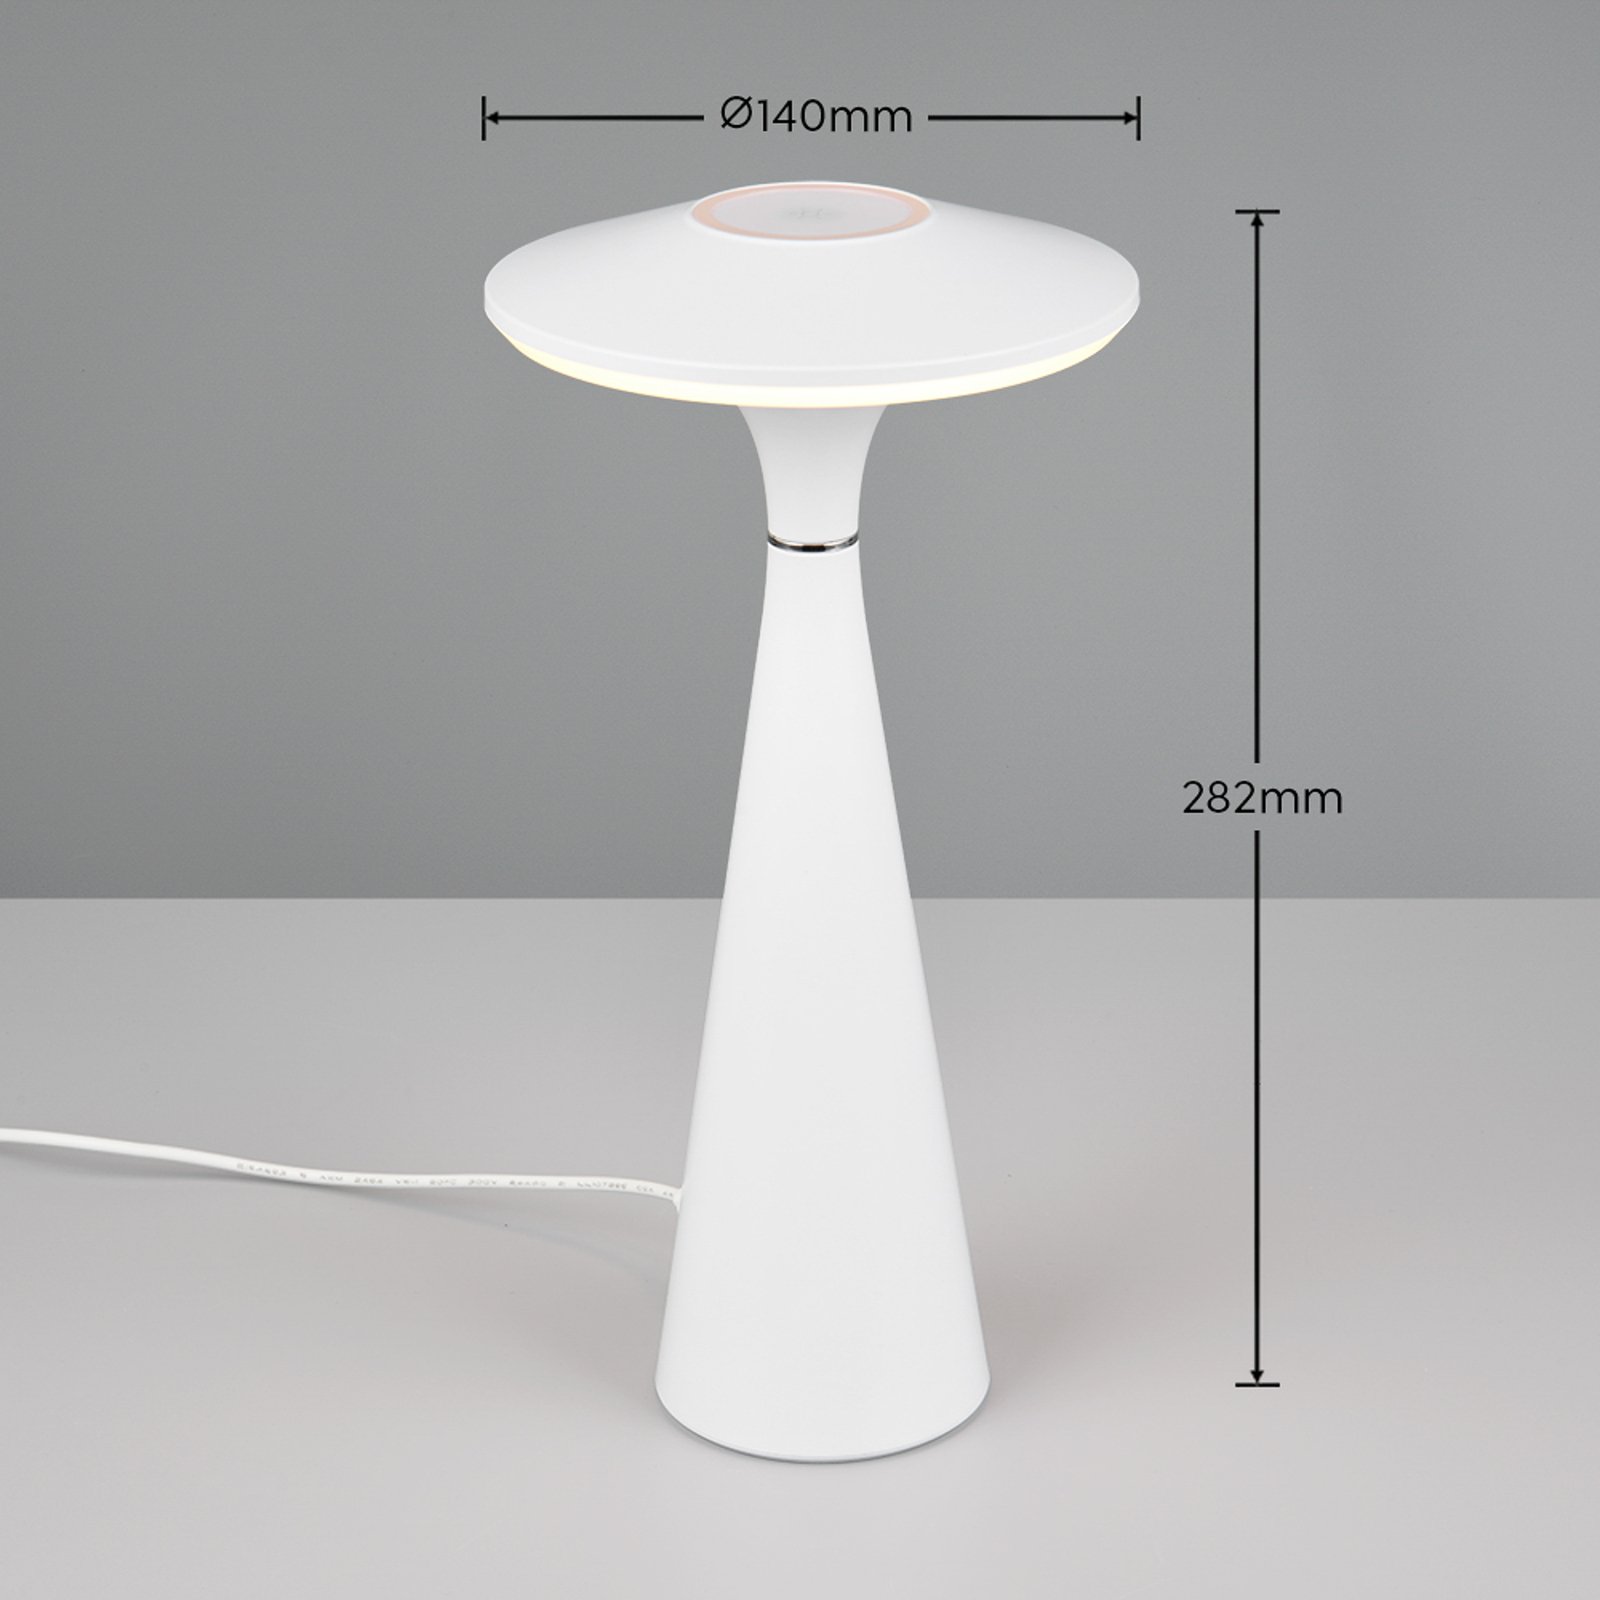 Torrez rechargeable LED table lamp, white, height 28.5 cm, CCT